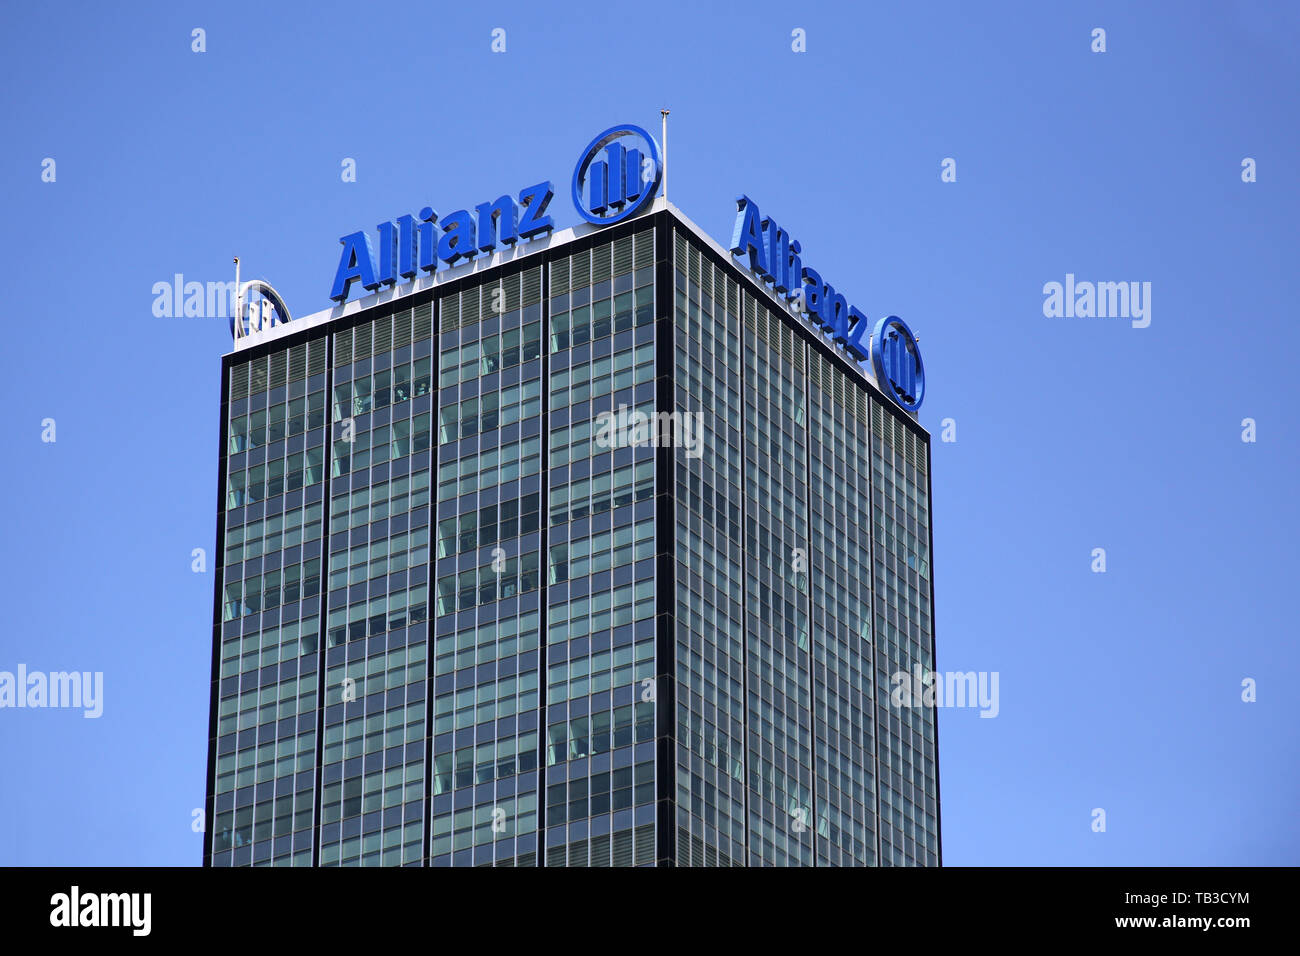 14.07.2018, Berlin, Berlin, Germany - Tower of the building complex Treptowers with the lettering of the insurance Allianz. 00S180714D860CAROEX.JPG [M Stock Photo